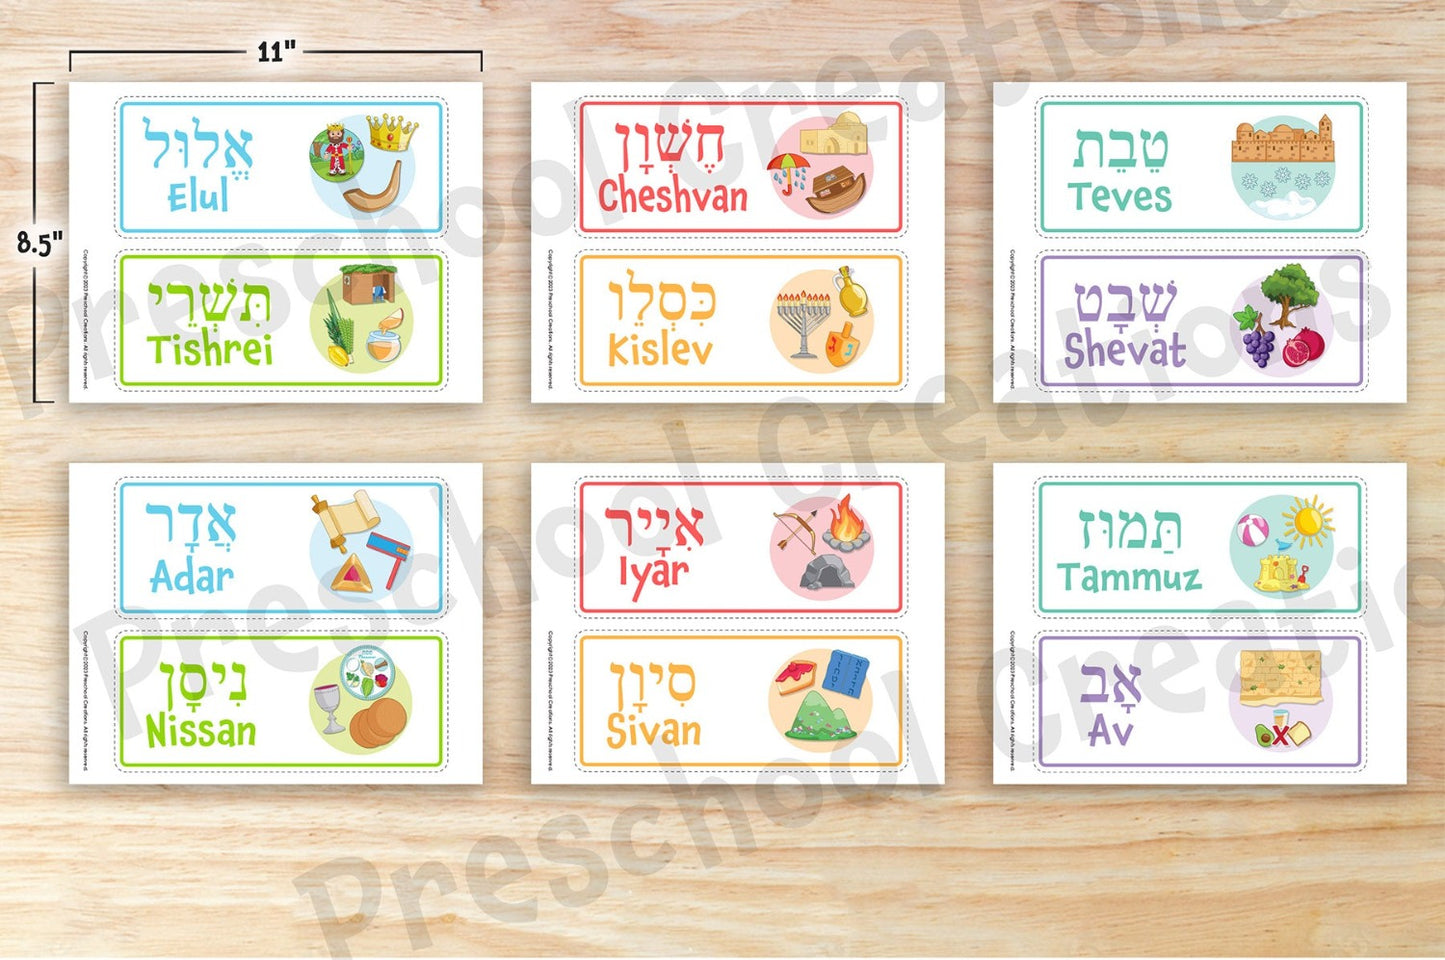 6 pages containing vibrant, full-color images showcasing each month of the Jewish calendar year in a compact, half-size format.  Introduce children to the Jewish calendar with these vibrant half-size posters. Featuring engaging images for each month's Jewish holidays, these posters will add a lively atmosphere to any classroom or home bulletin board. Bring the Jewish months of the year to life with fun artwork and inspiring color!